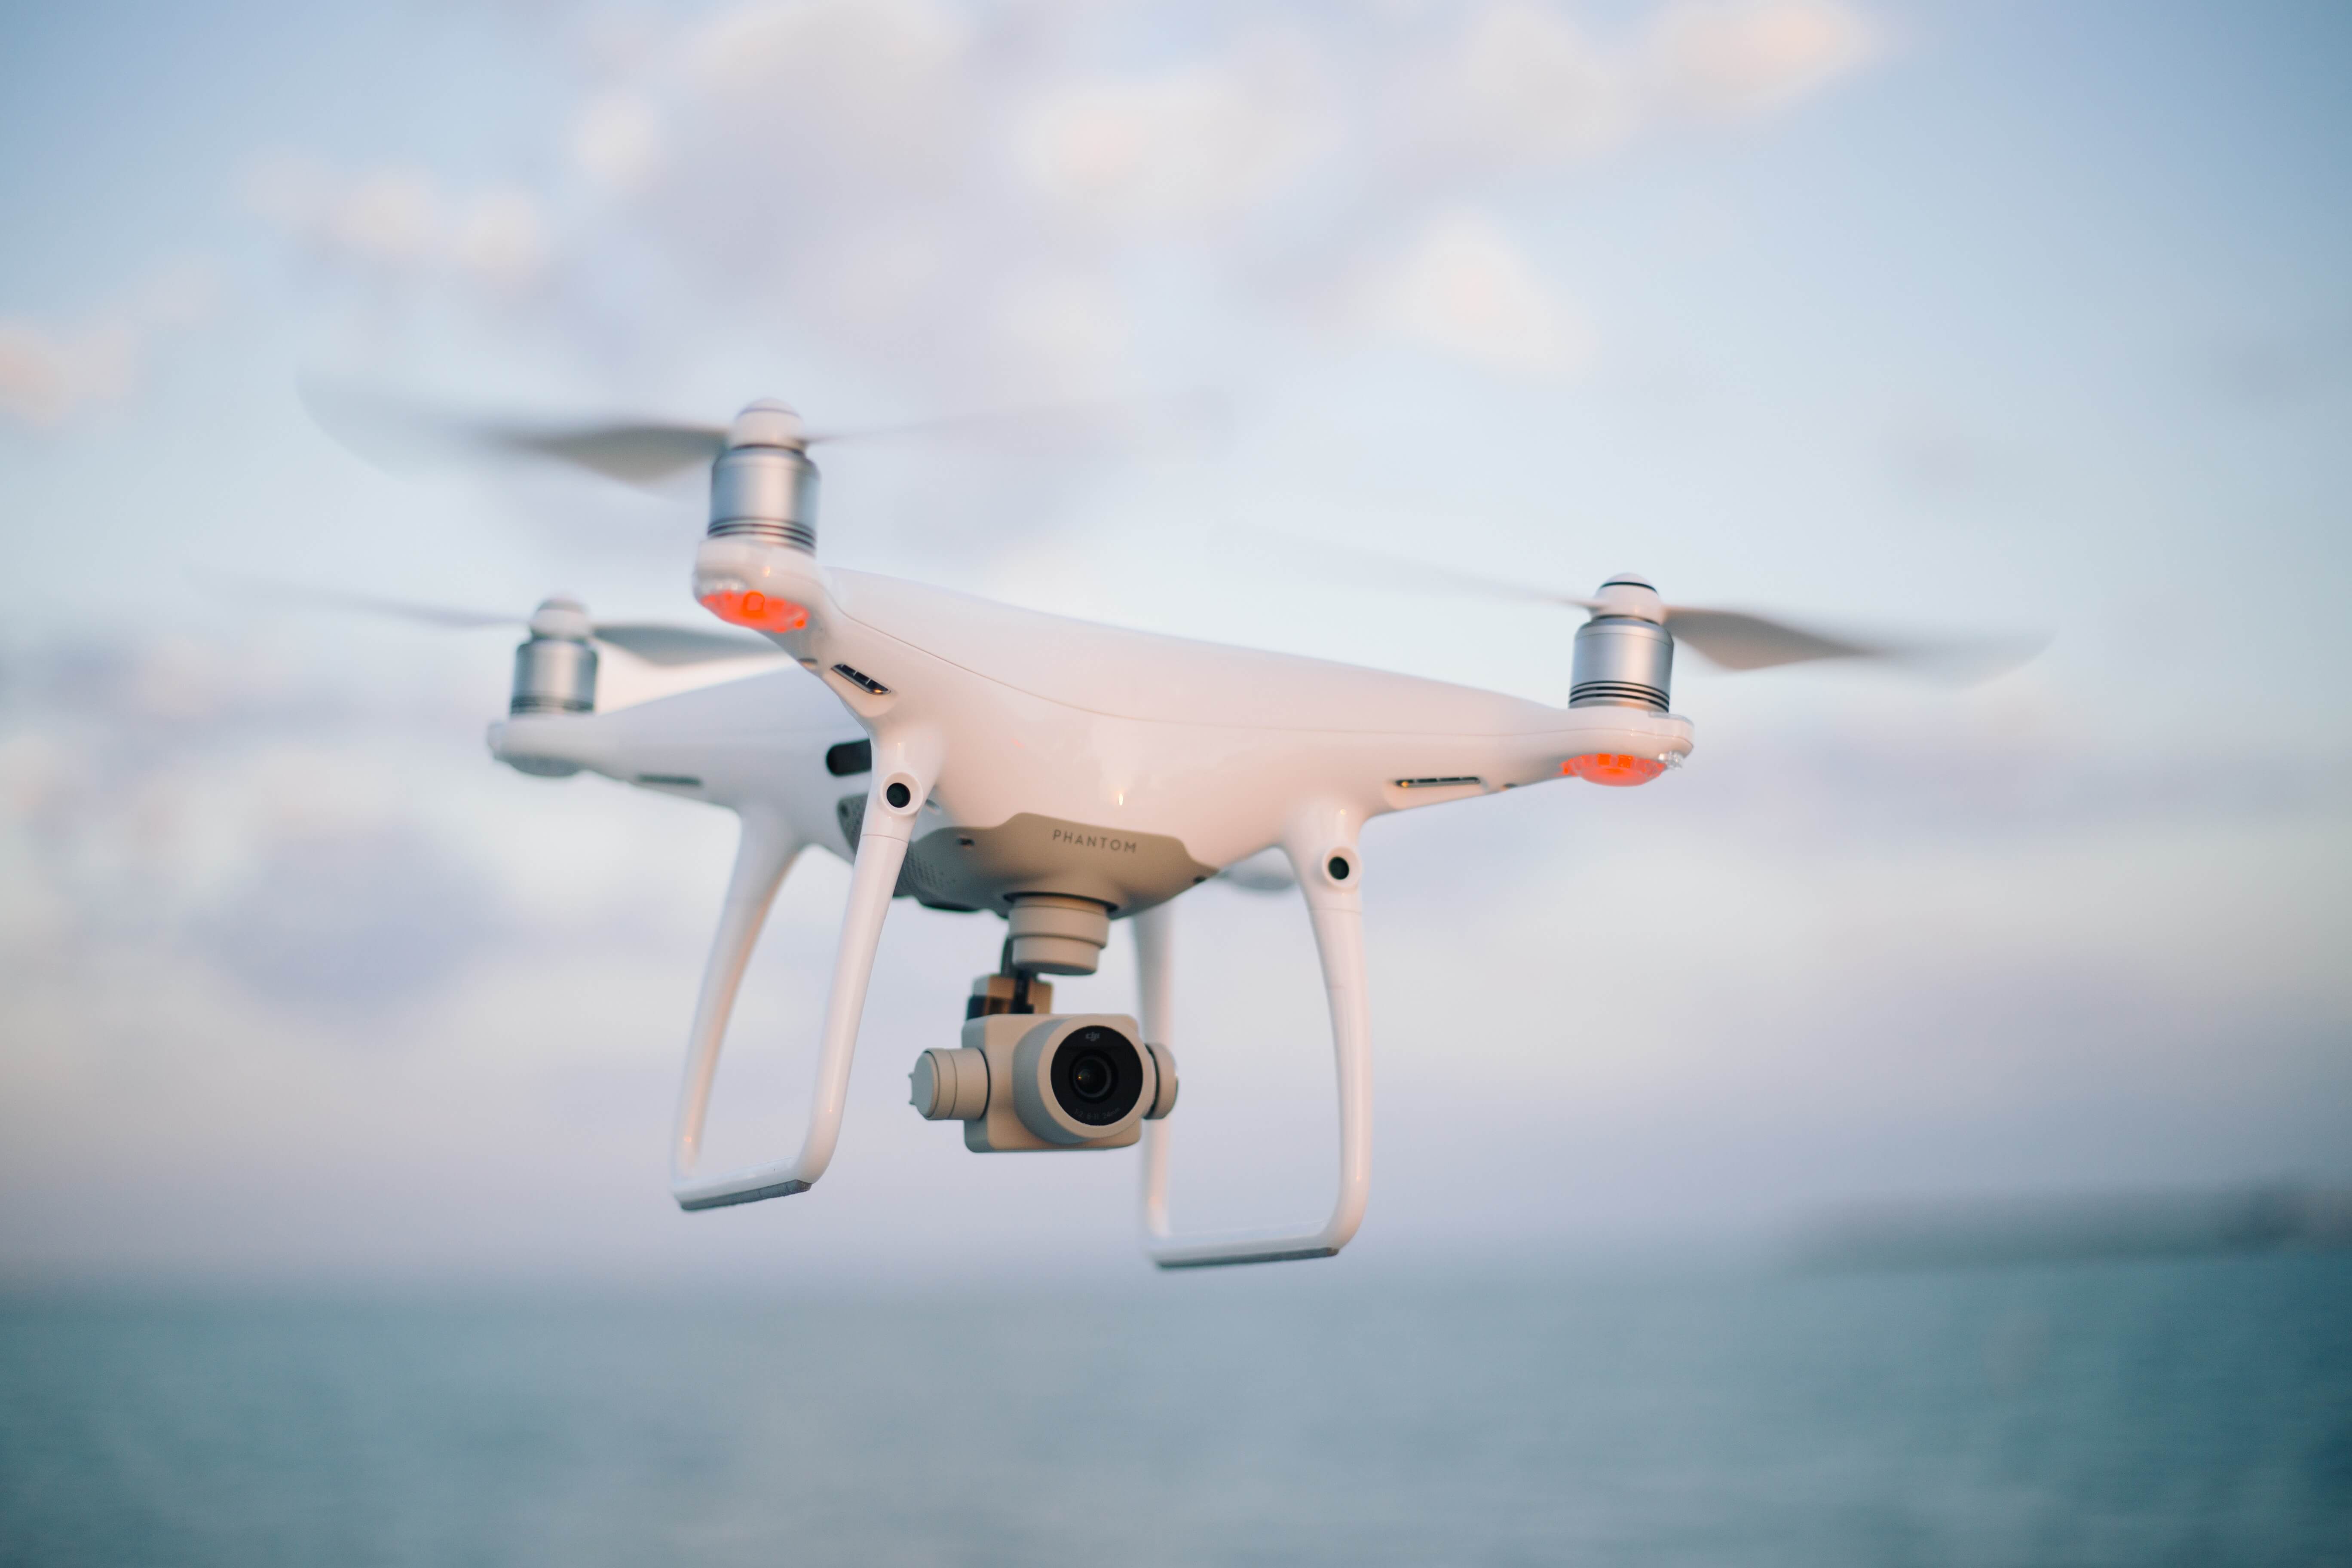 Thinking through drone security keeps venues safe